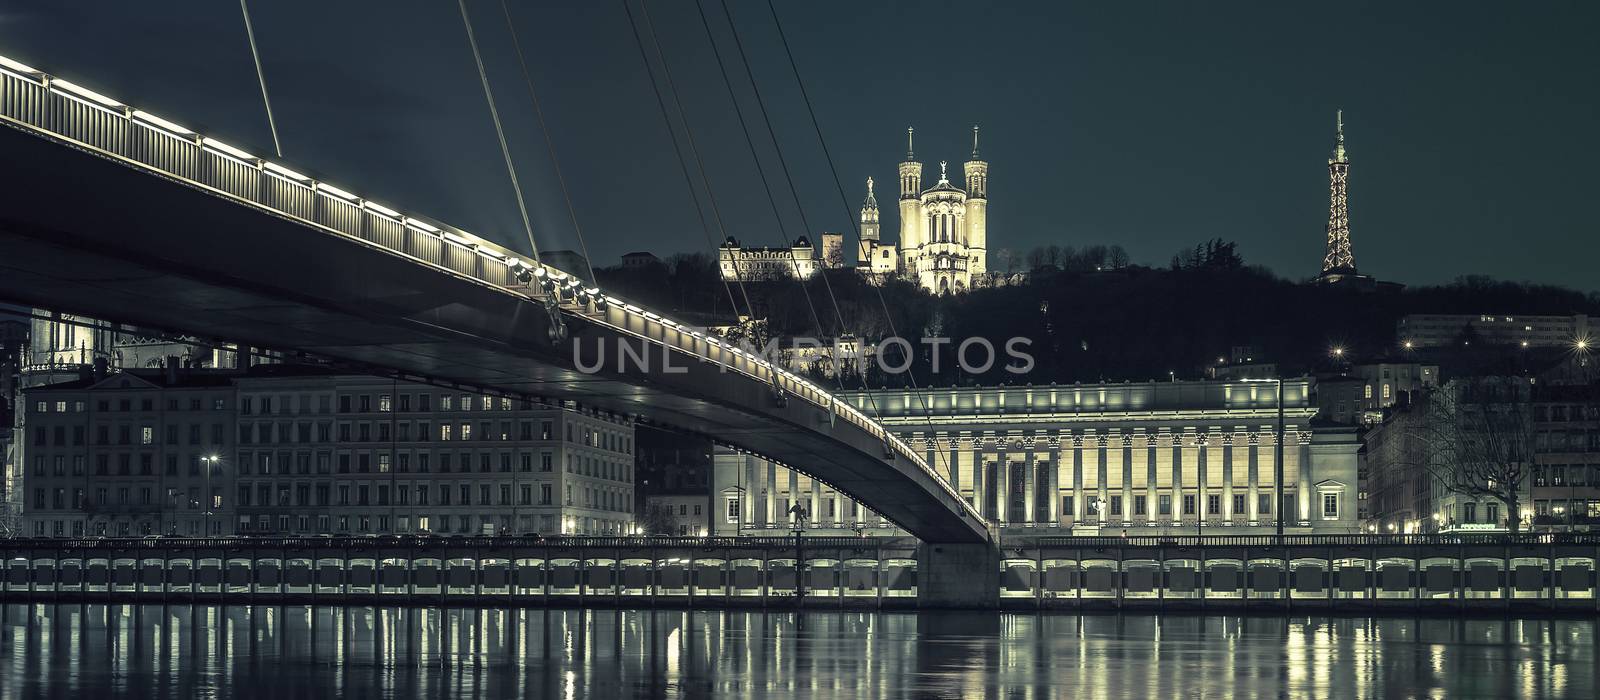 View of Saone river at Lyon by night, special photographic processing, France